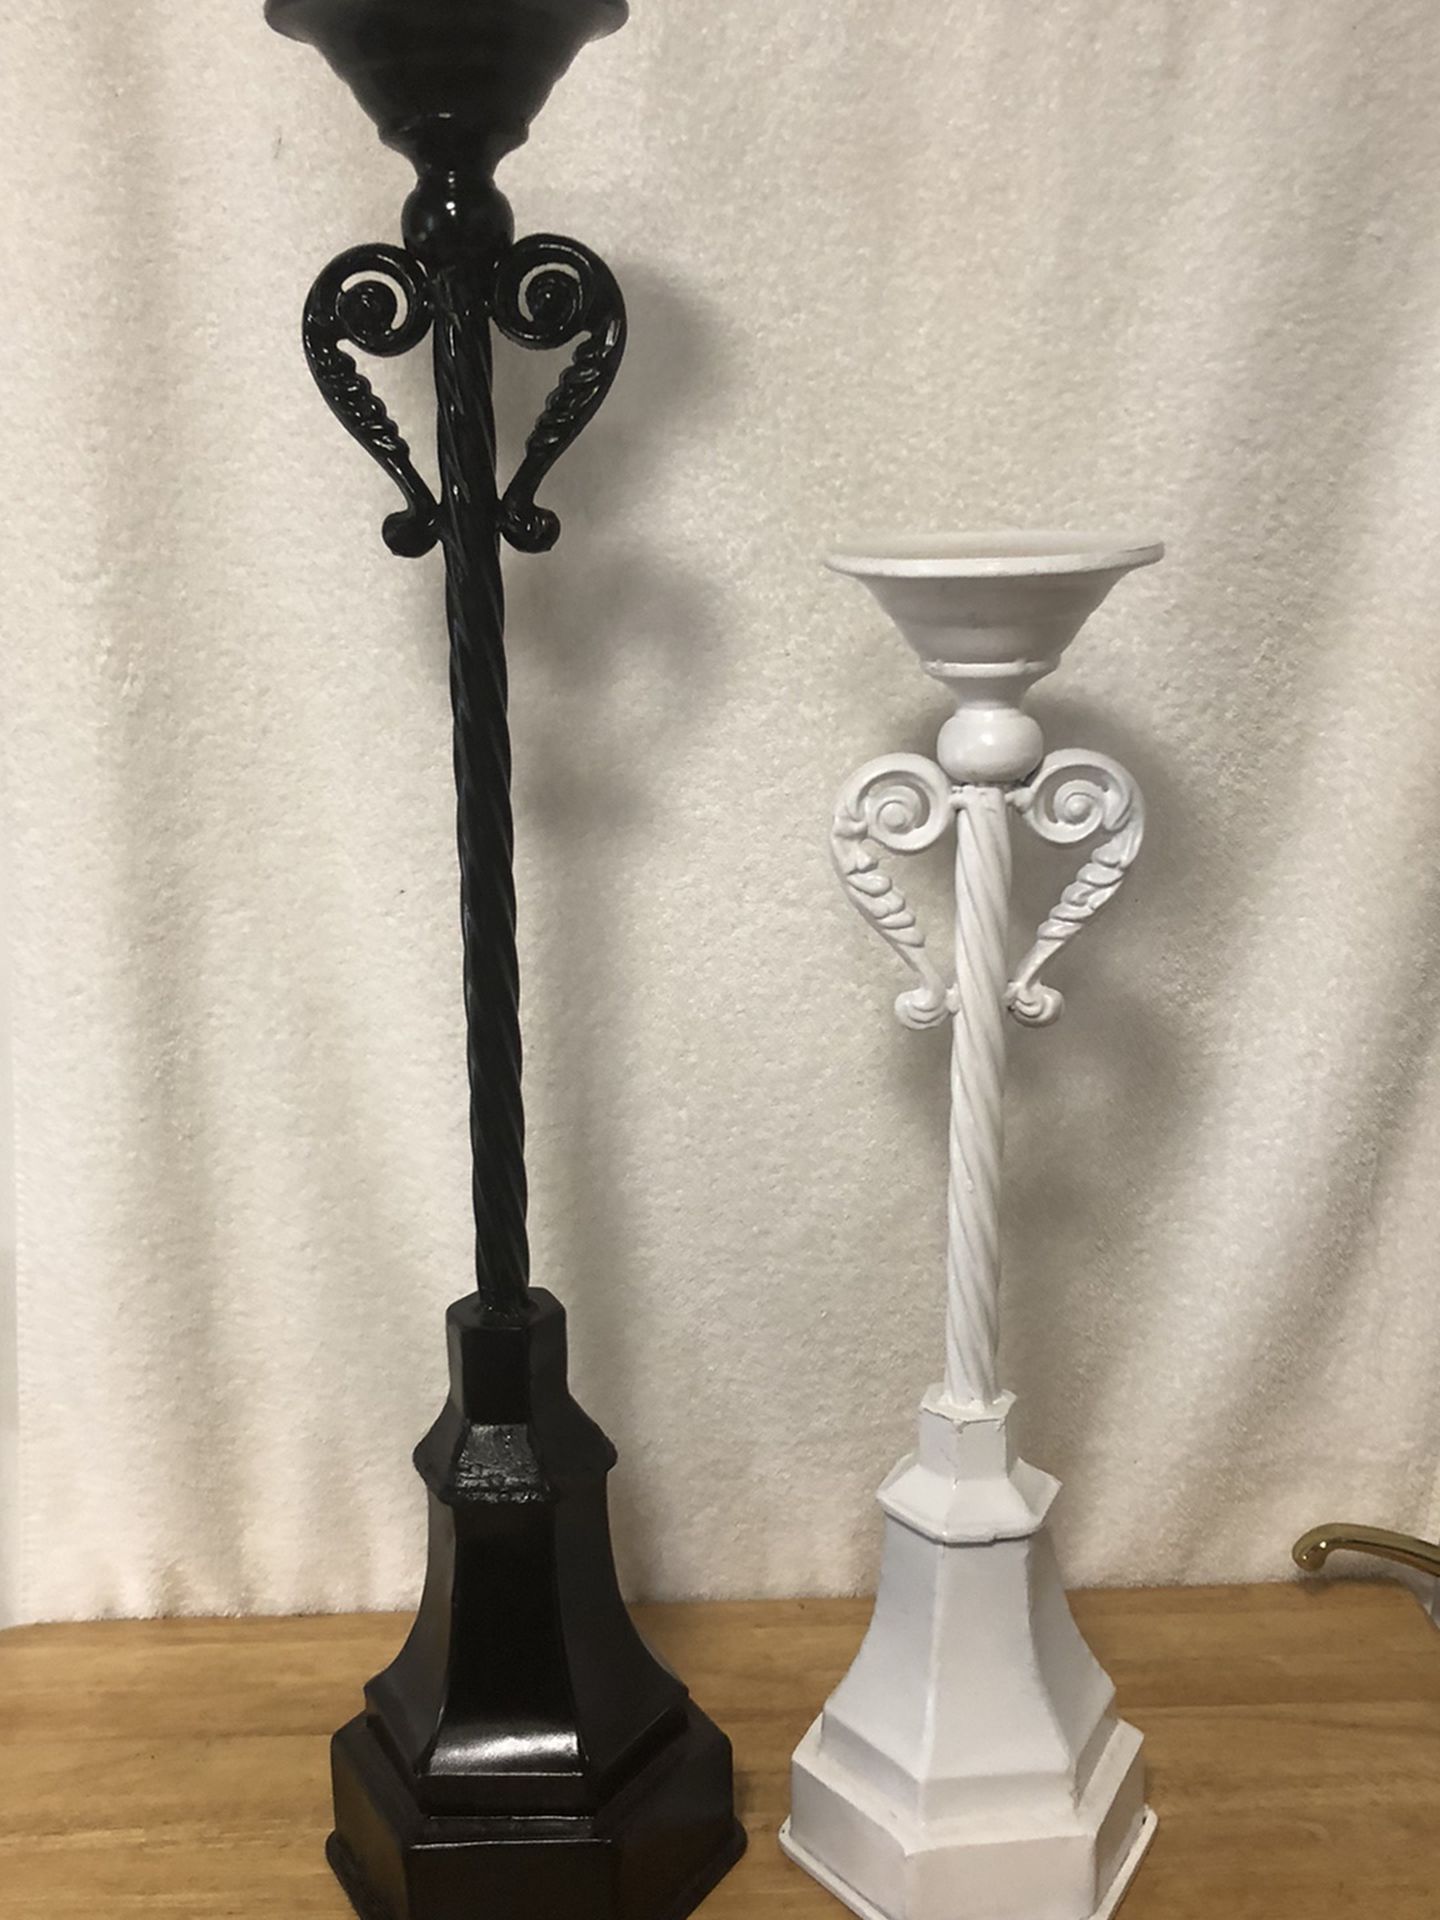 Pair of TALL Heavy Metal Candlesticks. $15 for the Pair. Excellent Condition.